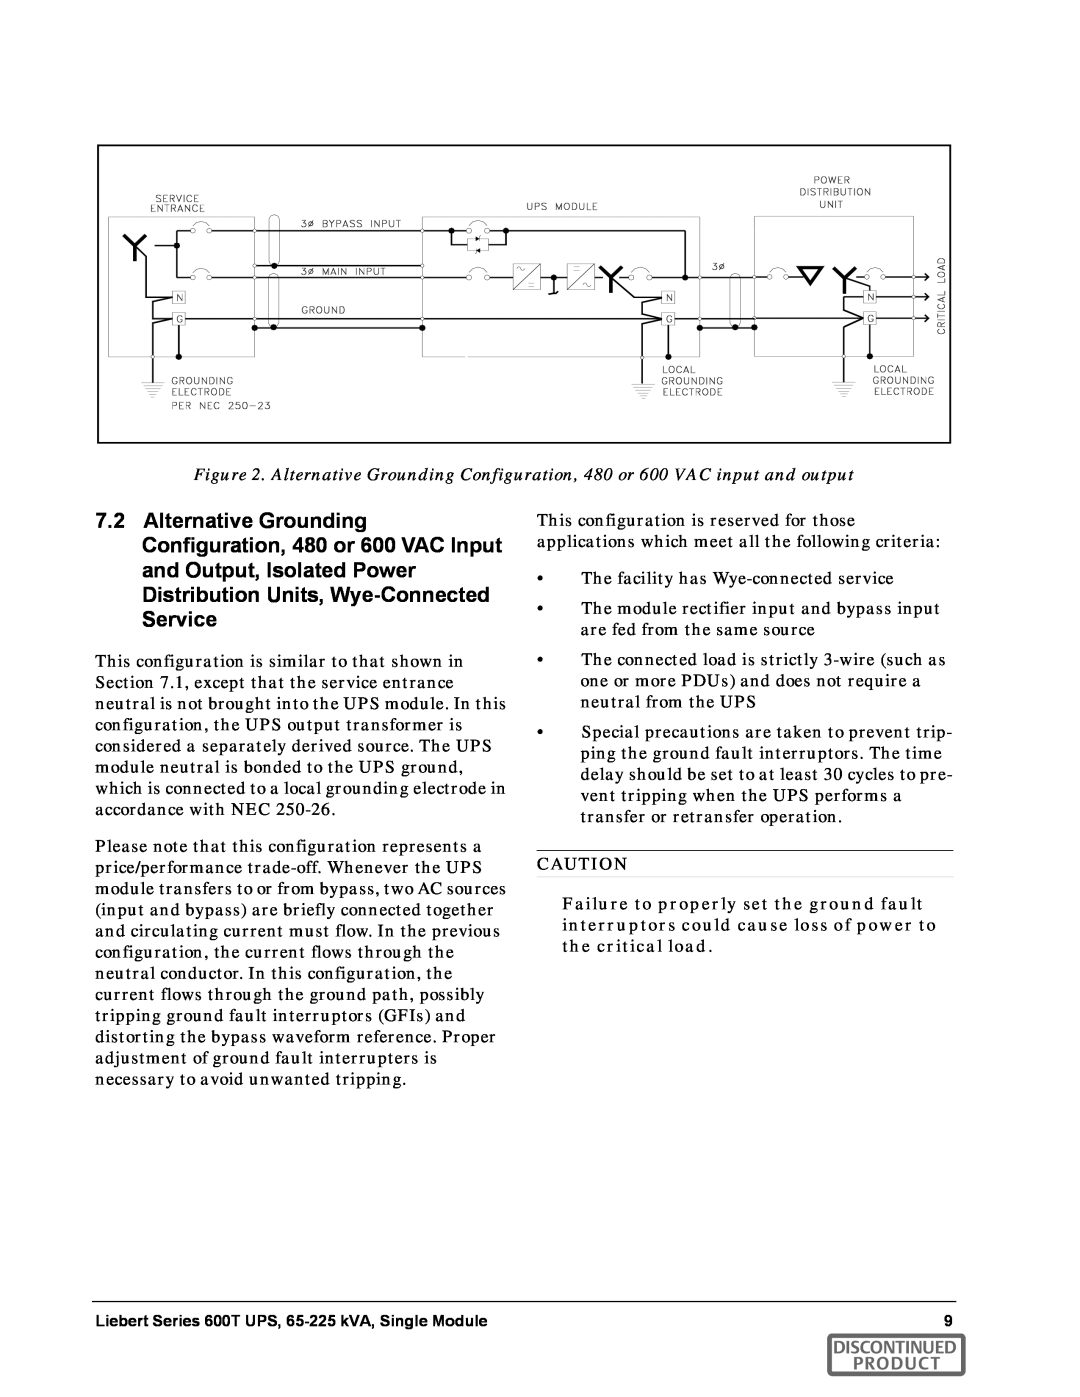 Emerson SERIES 600T manual The facility has Wye-connected service, Discontinued Product 